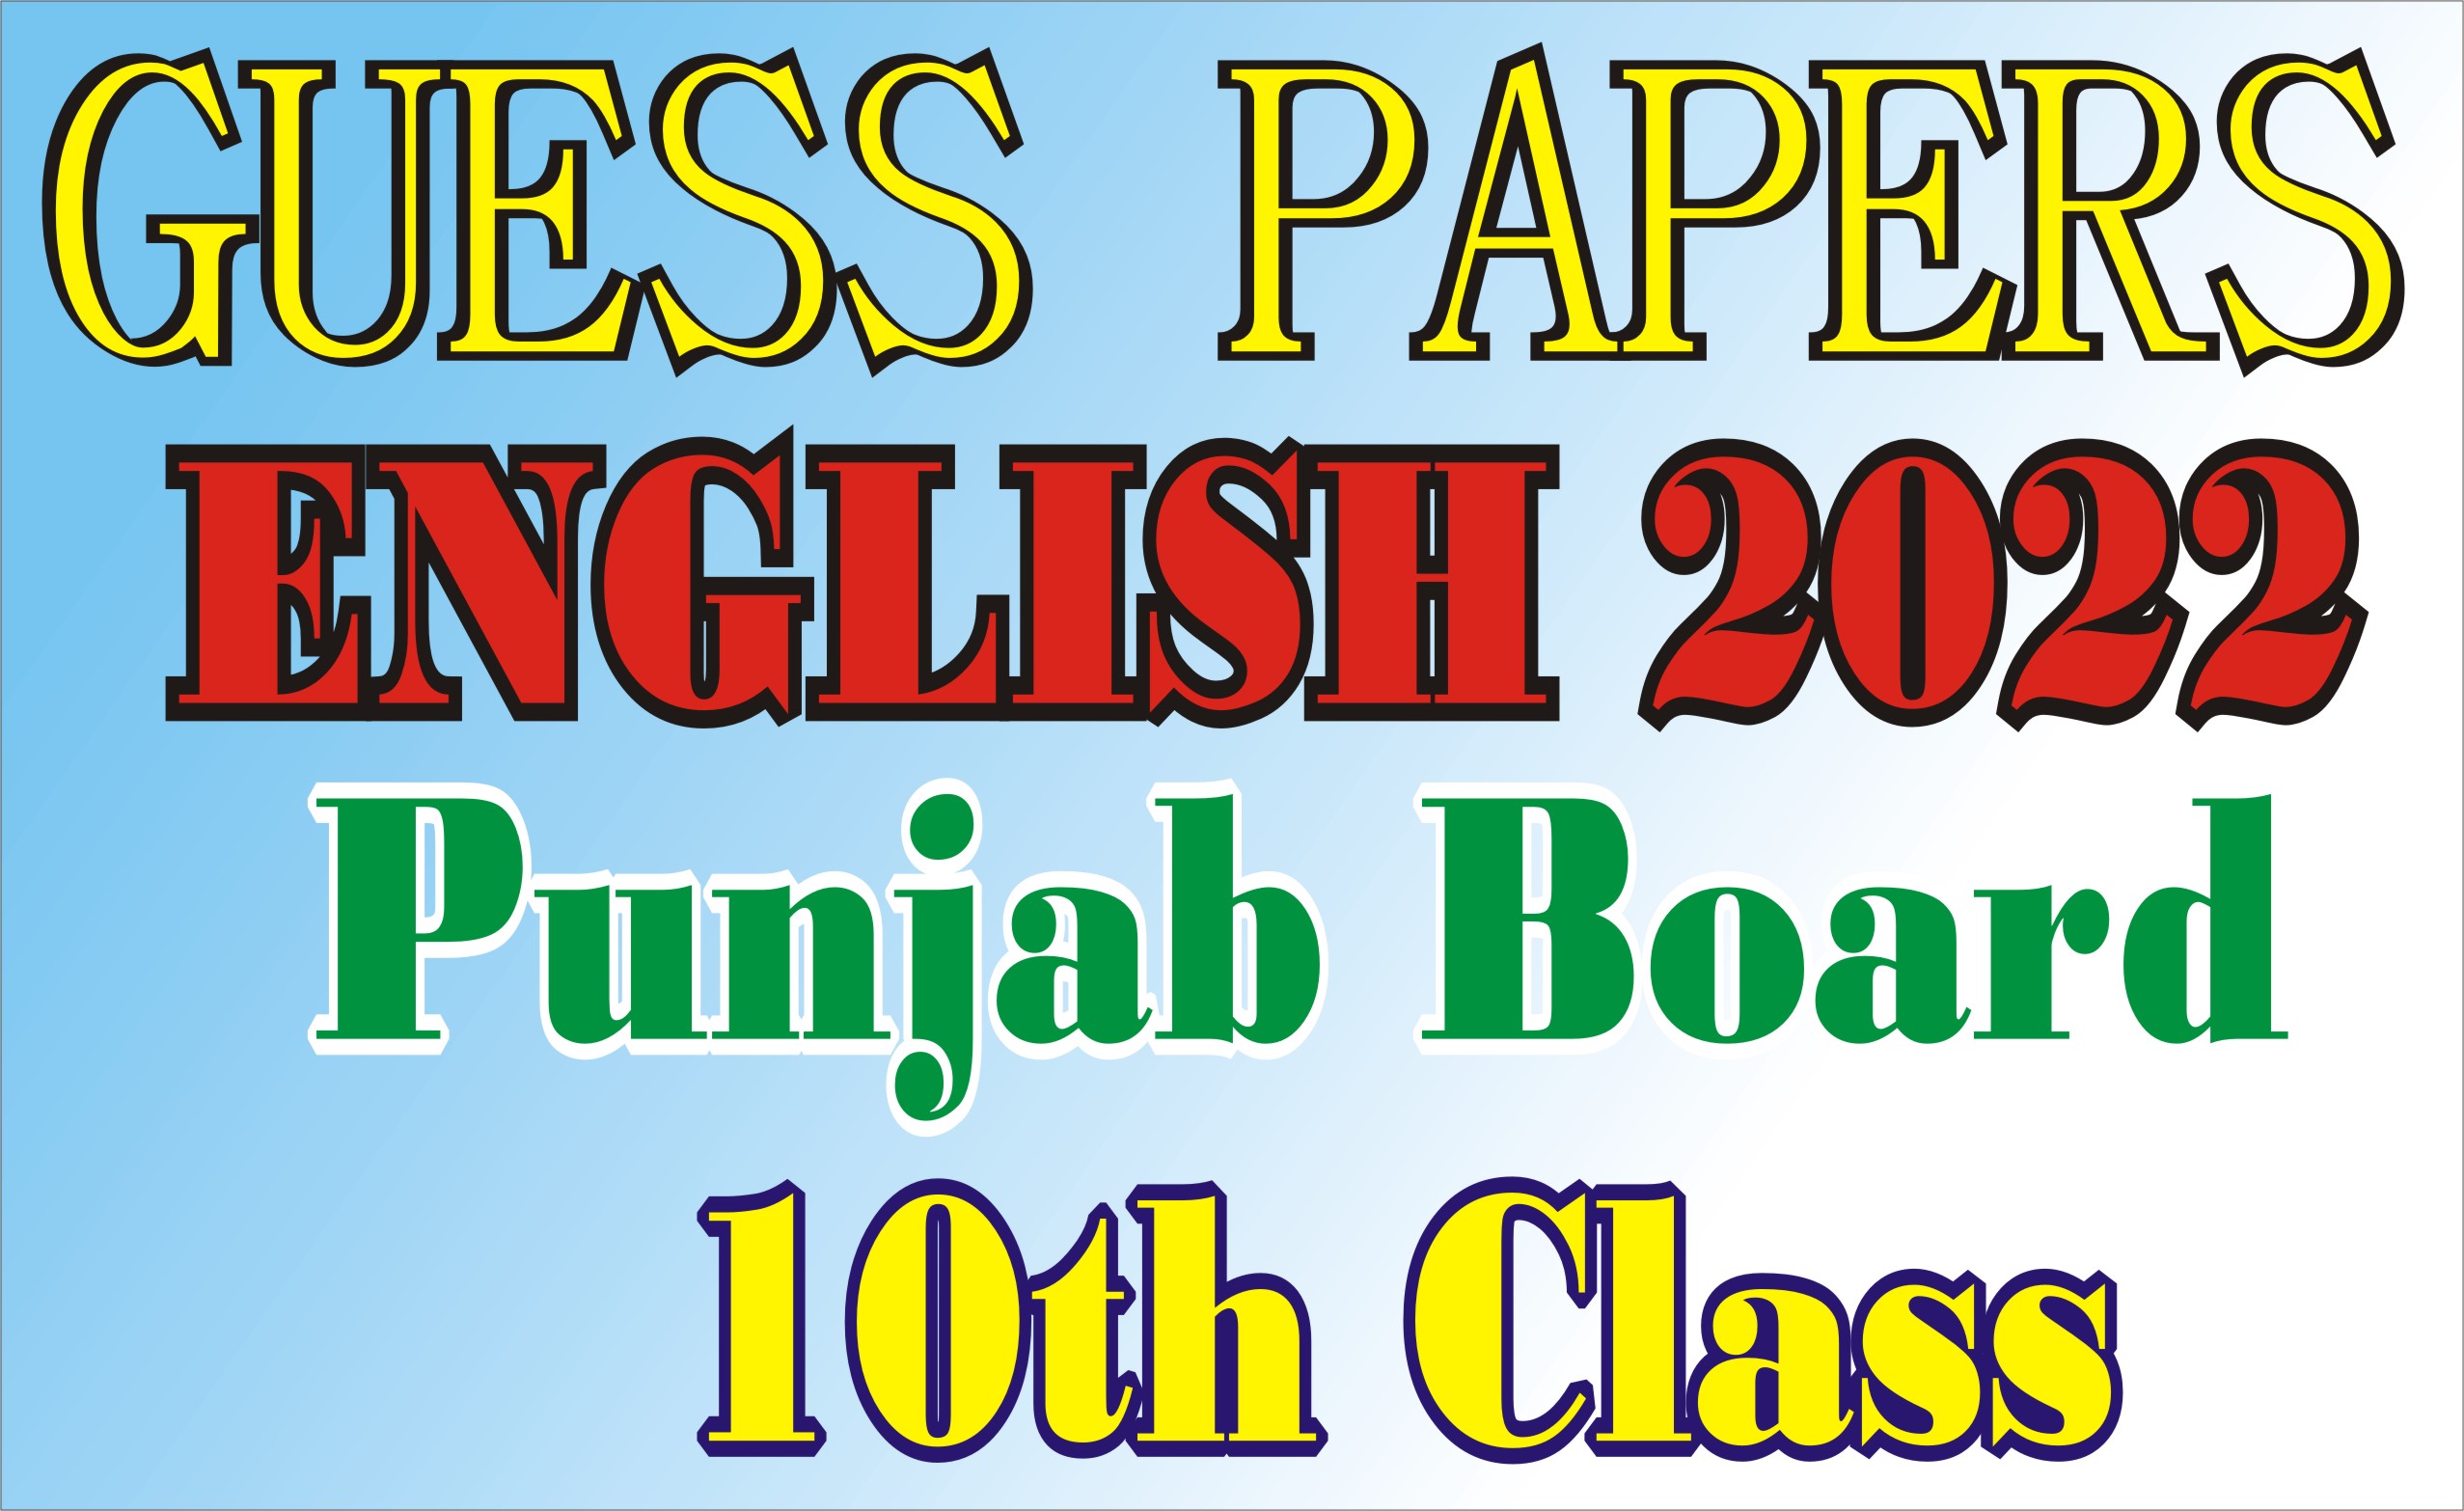 guess papers english 2022